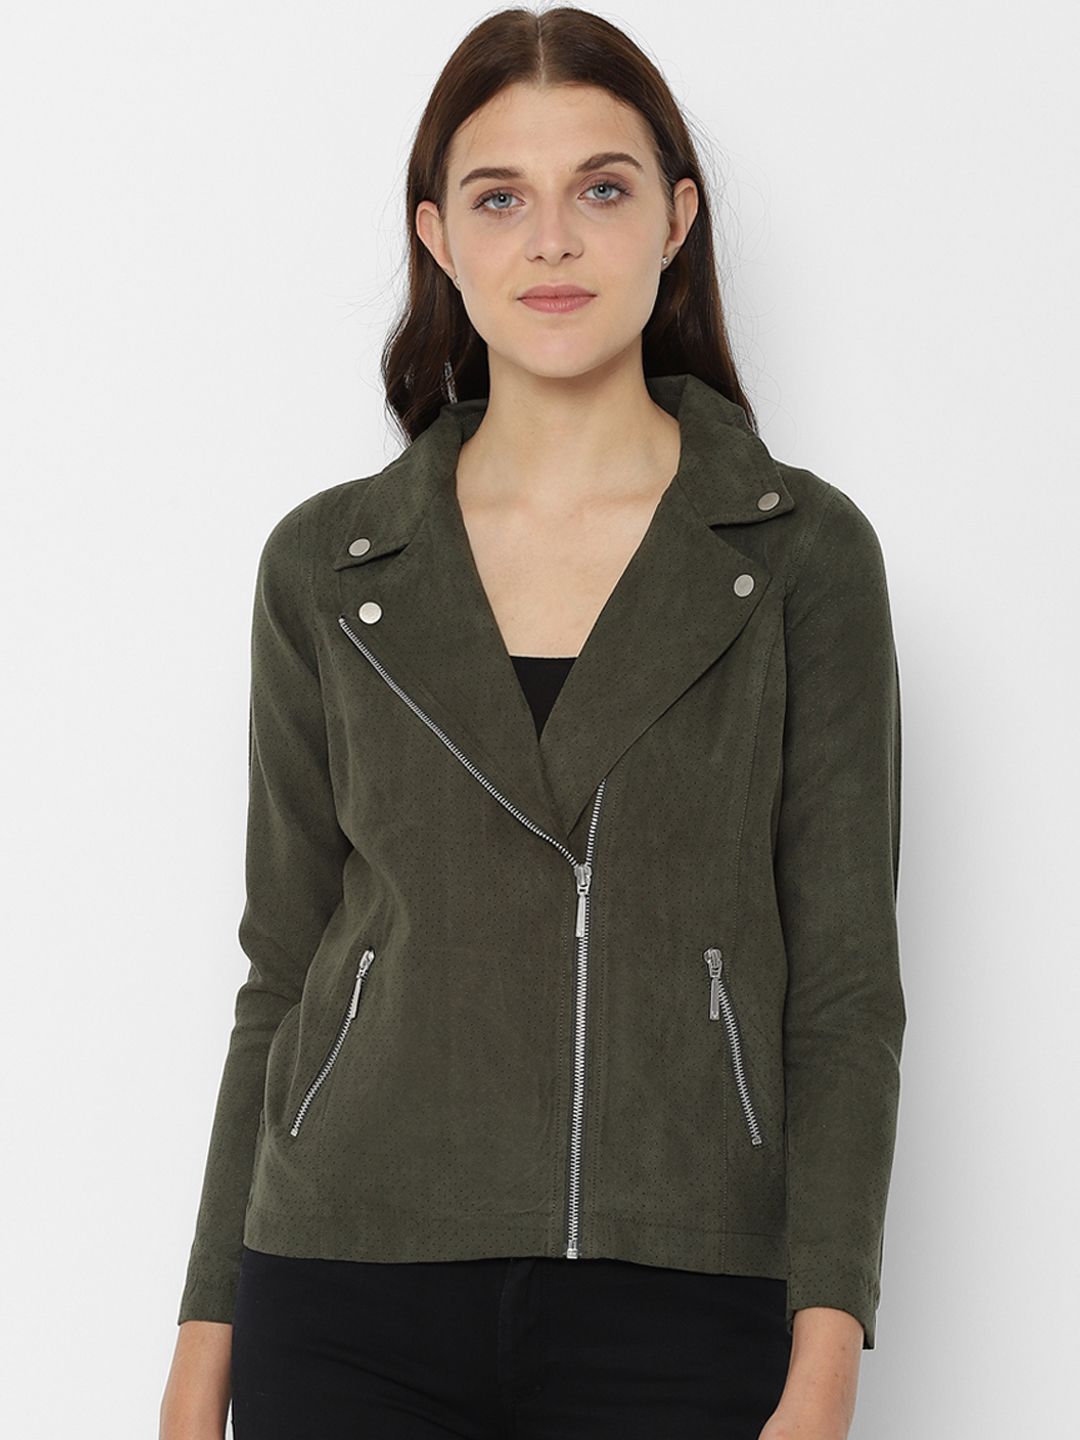 Allen Solly Woman Women Olive Green Solid Jacket Price in India